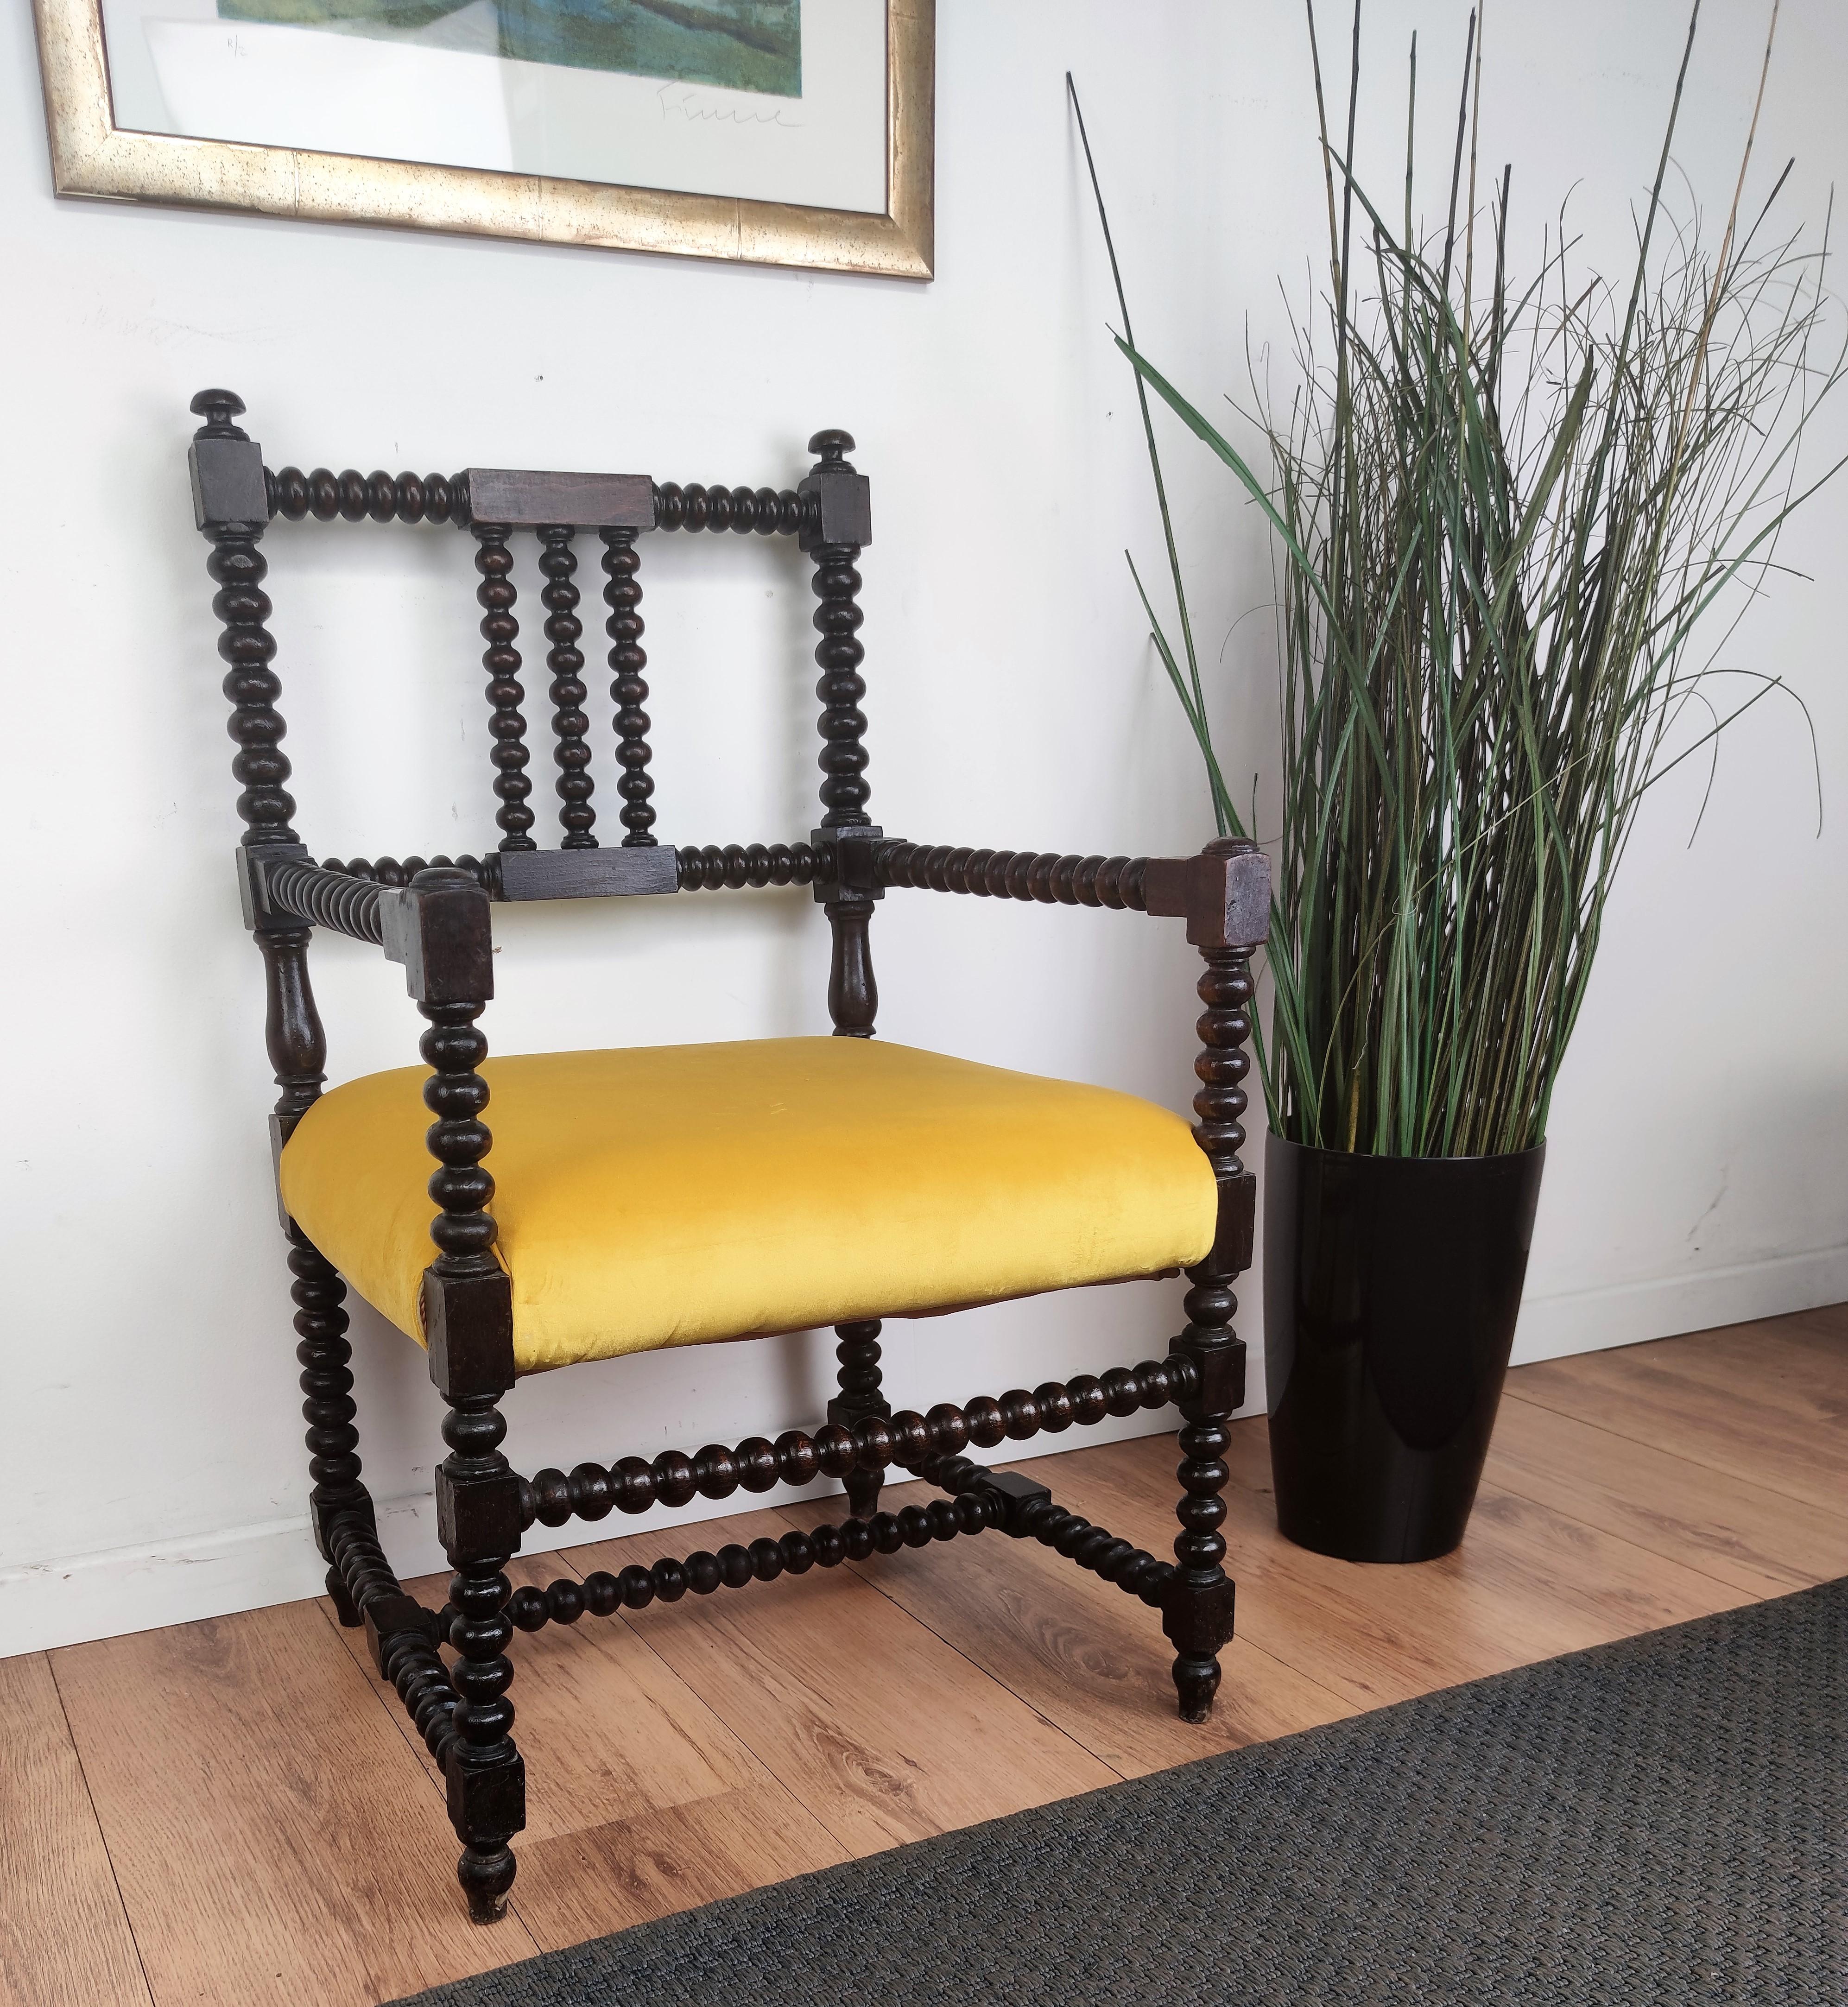 Beautiful and charming French armchair. Every section of the frame has beautifully turned solid wood elements creating the bobbin structure. The seat has been fully reconditioned and newly upholstered in a yellow fabric.

Finished on all sides,